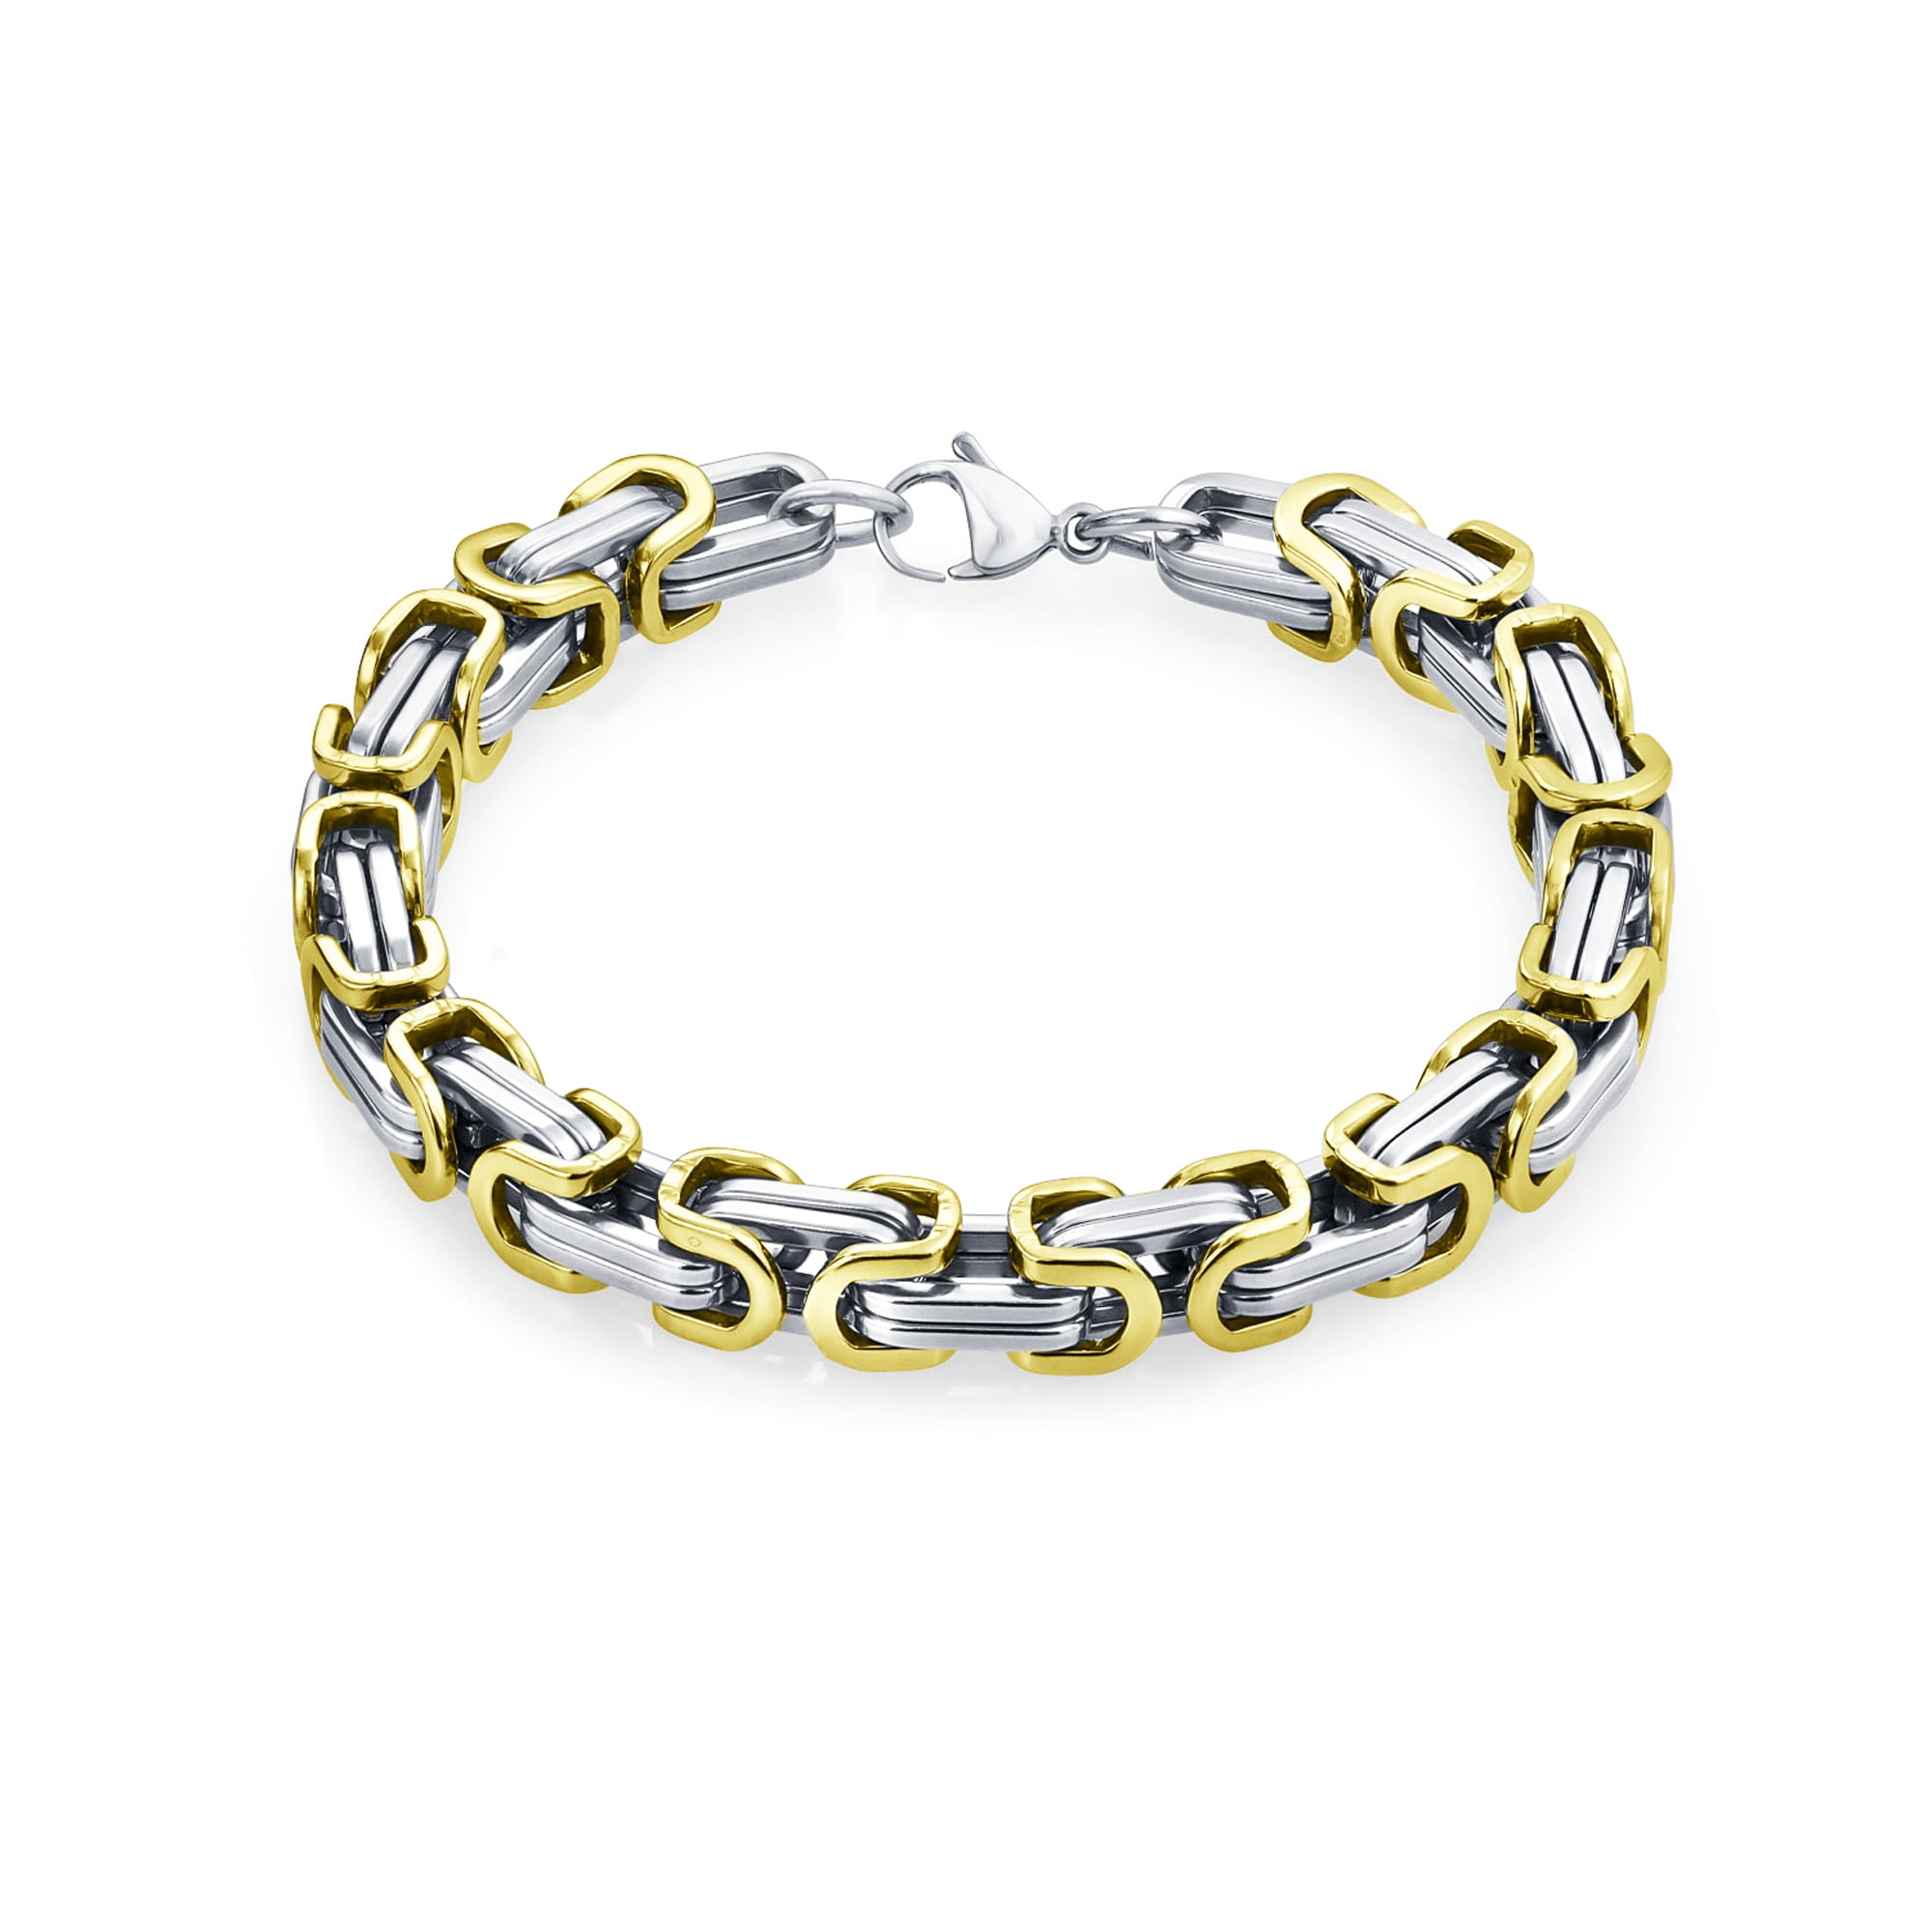 Two Tone Black Yellow 34 inch Wide Double Link Design Unisex Stainless Steel Motorcycle Chain Bracelet